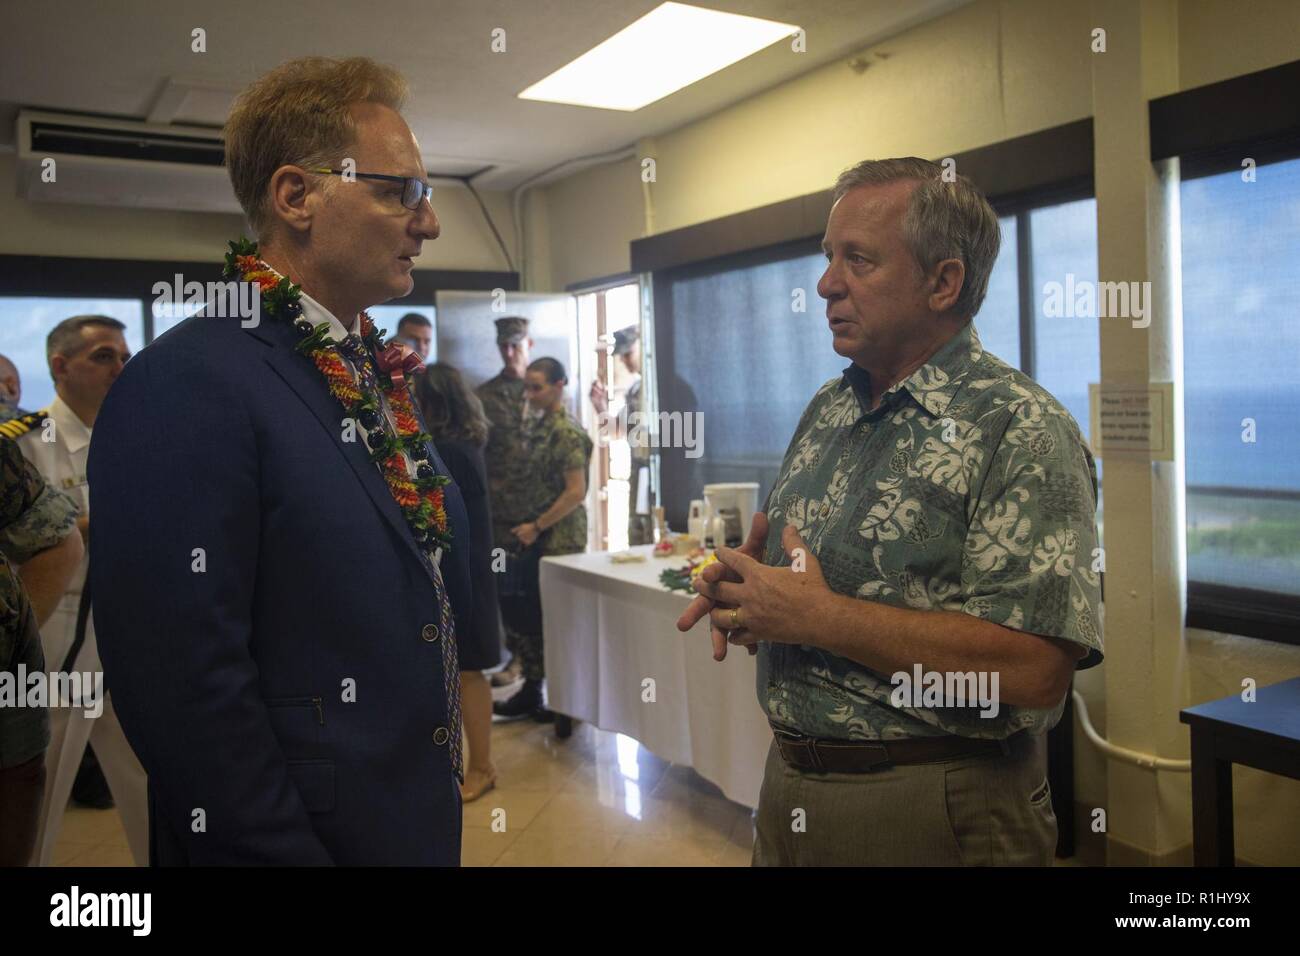 Craig Whelden (right), executive director of U.S. Marine Corps Forces, Pacific, speaks with Under Secretary of the Navy, the Honorable Thomas B. Modly, prior to a command brief at Kansas Tower, Marine Corps Base Hawaii (MCBH), Sept 21, 2018. Modly engaged with senior leaders from U.S. Marine Corps Forces, Pacific, Marine Corps Base Hawaii, and Marine Aircraft Group 24 to gain a better understanding of the aviation units and readiness of Marine assets aboard Oahu. Stock Photo